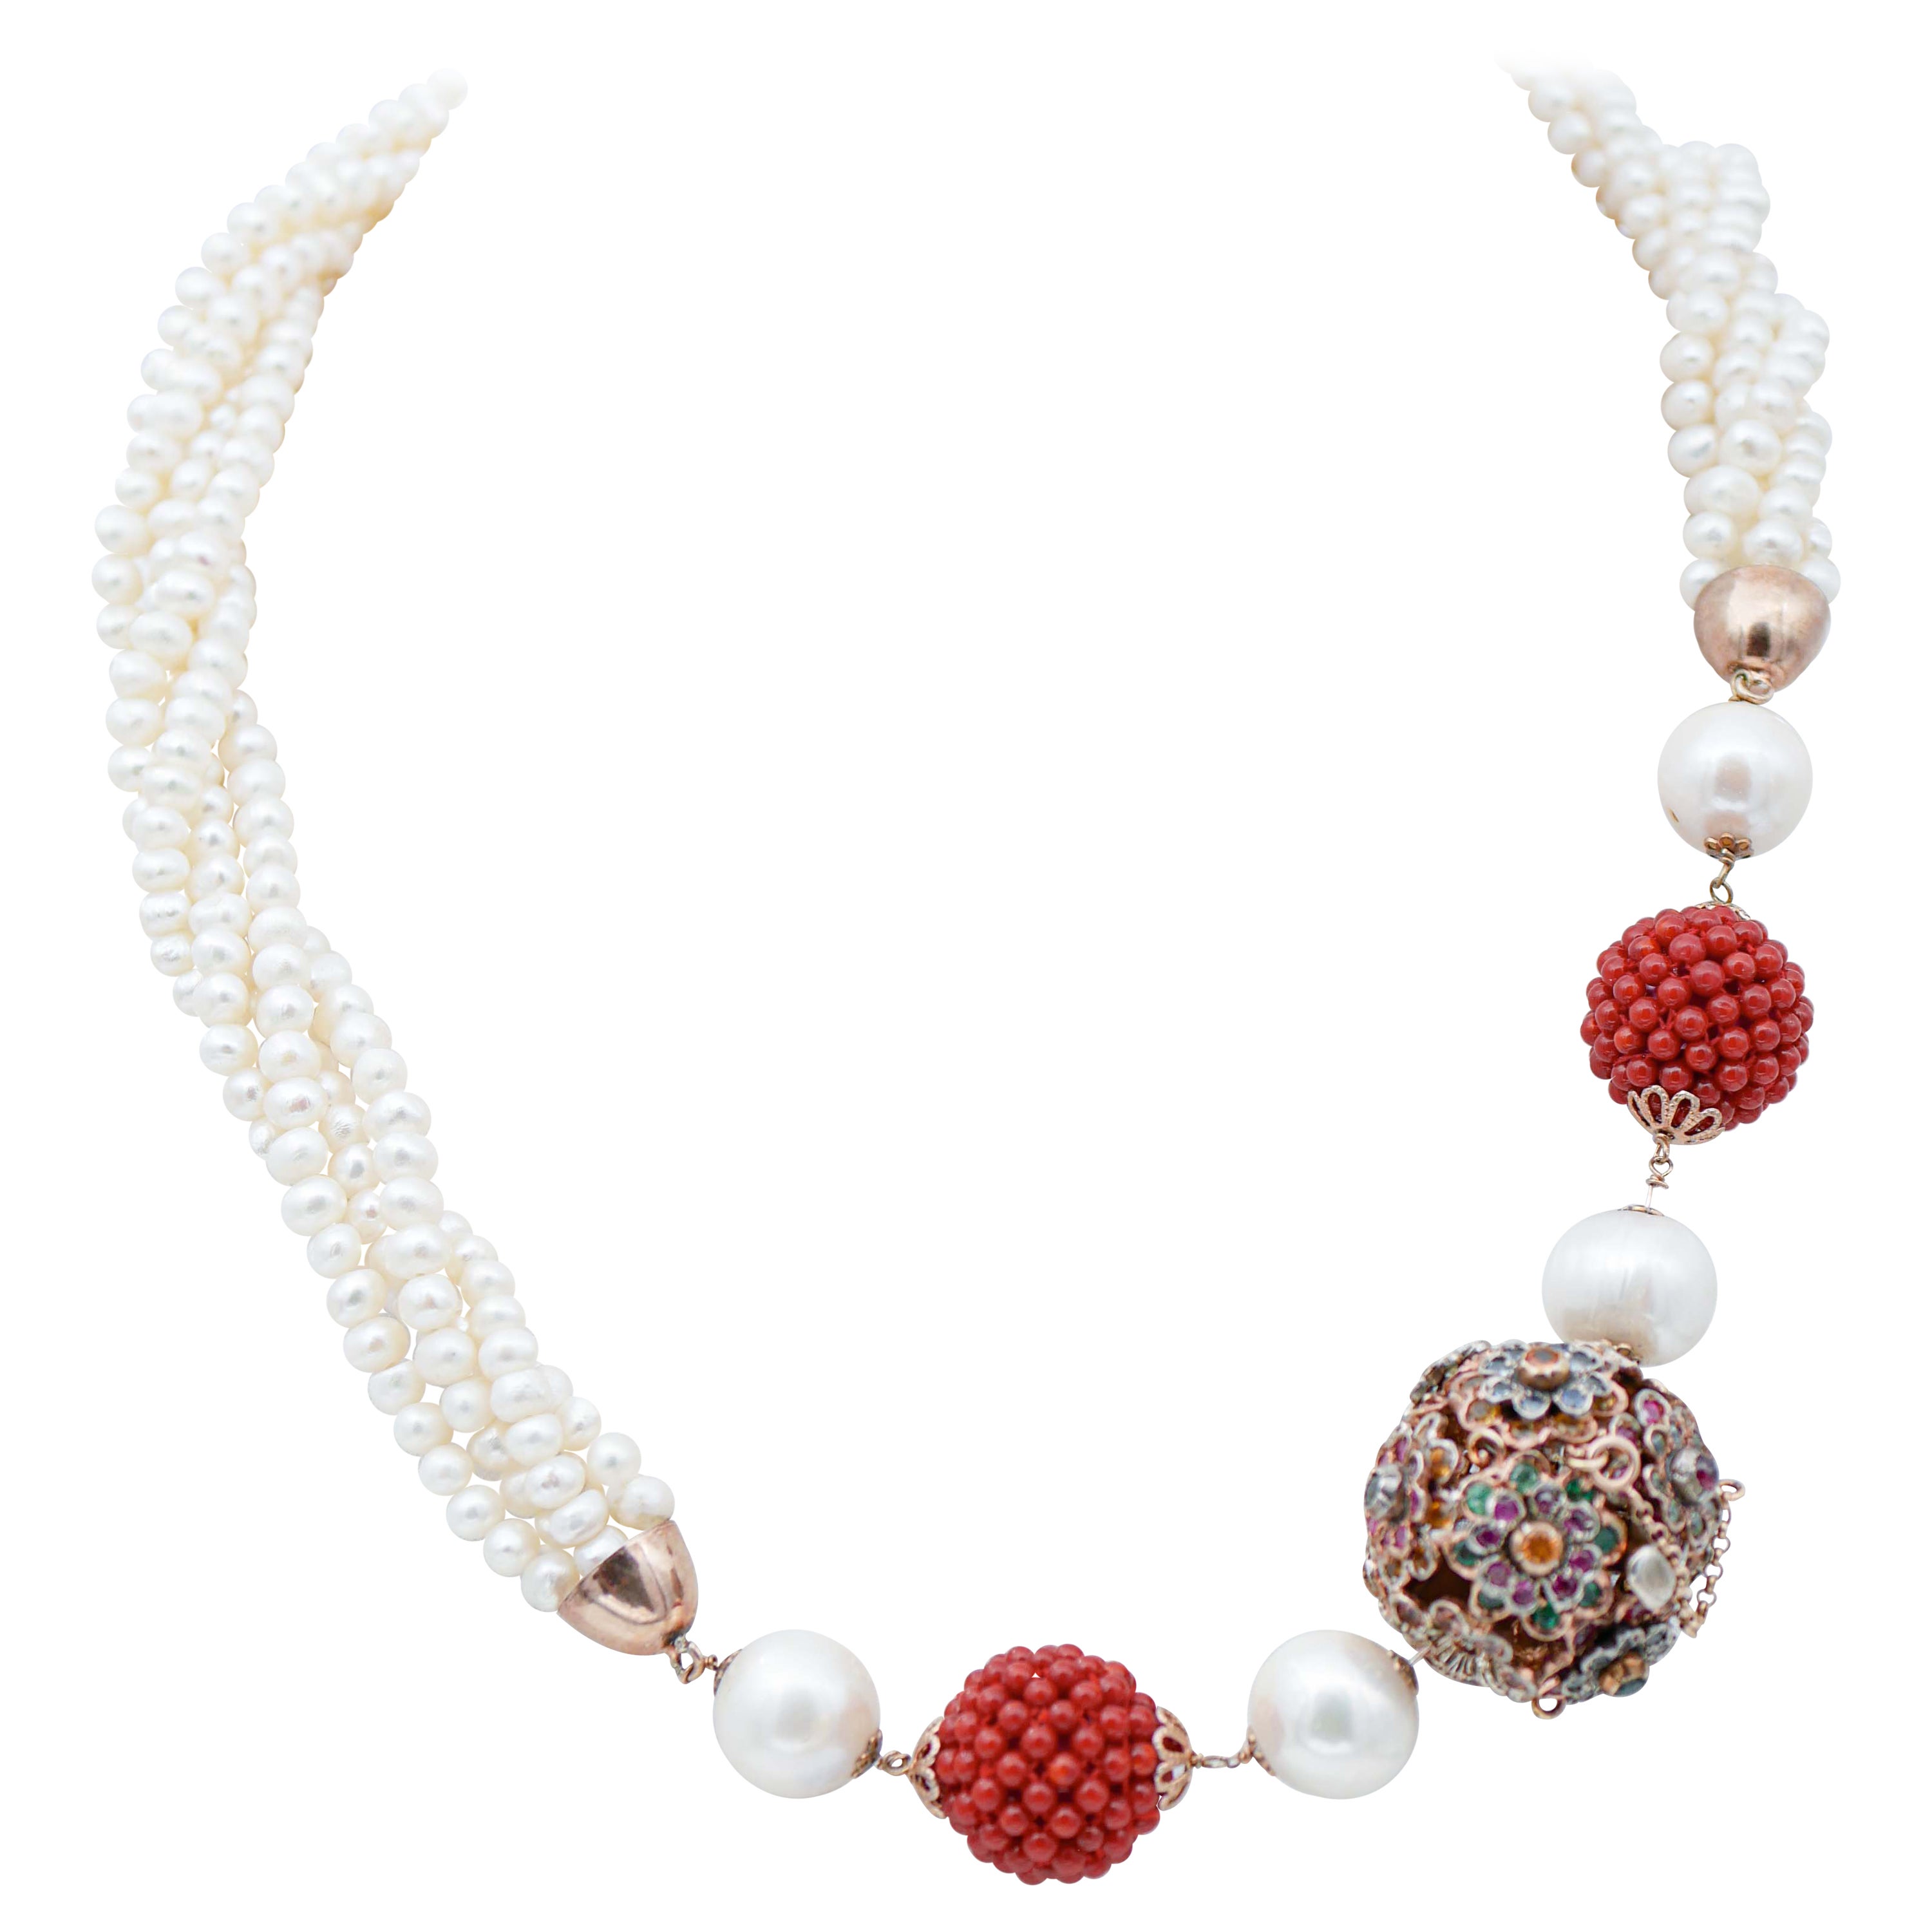 Stones,Pearls,Emeralds,Rubies,Sapphires,Rose Gold and Silver Torchon Necklace.